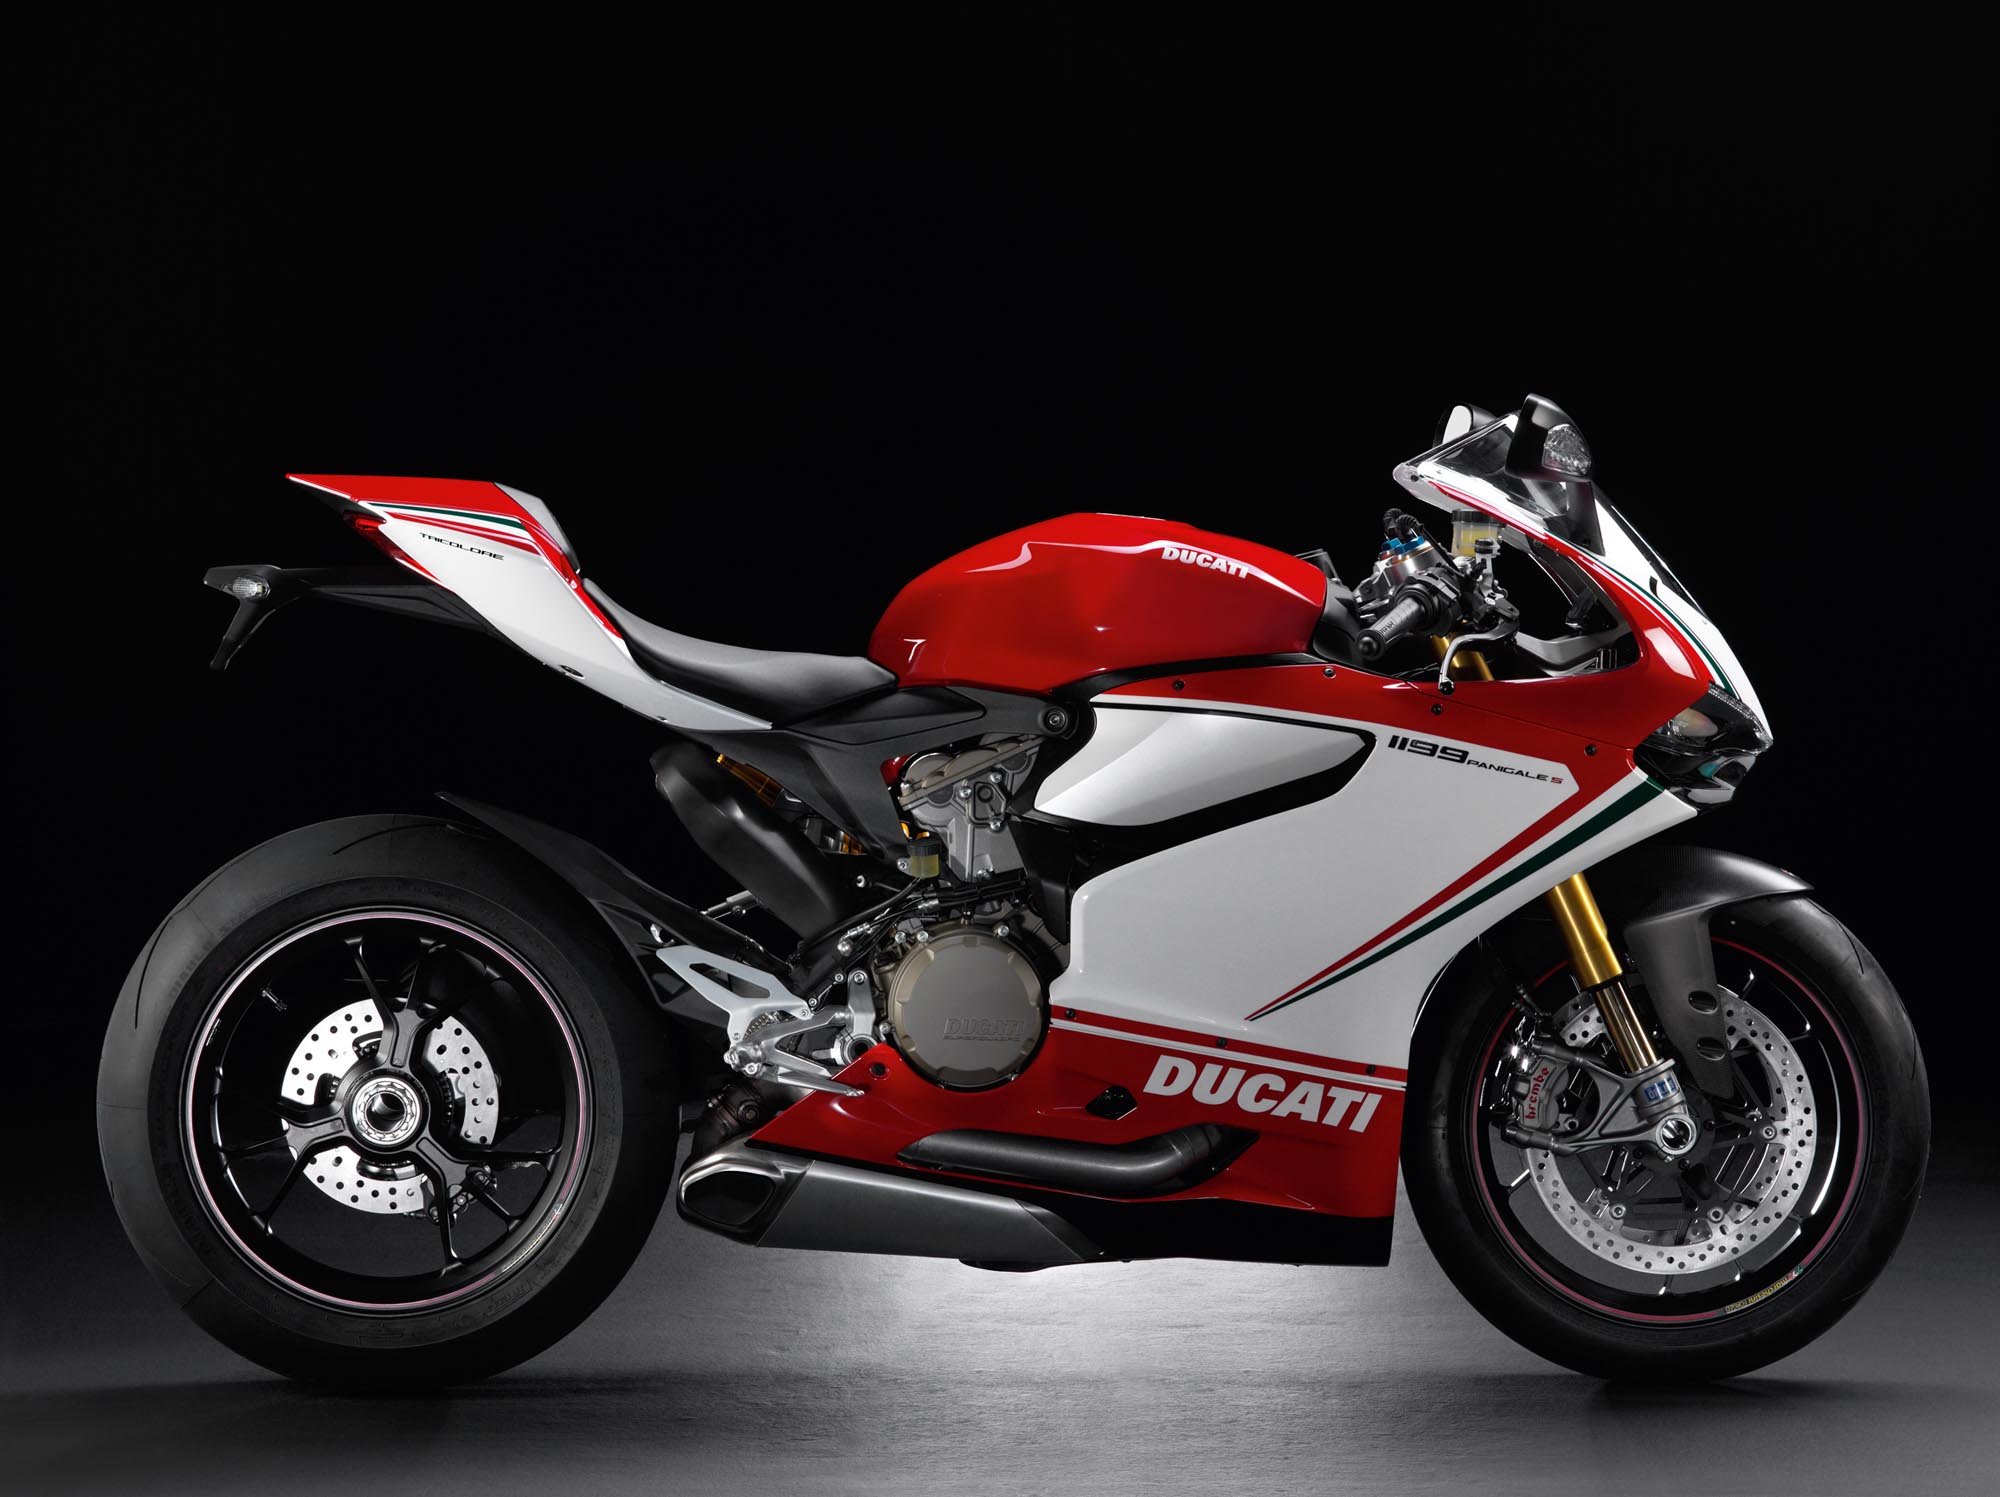 Ducati 1199 Panigale Hi Resolution Gallery And Beauty Video